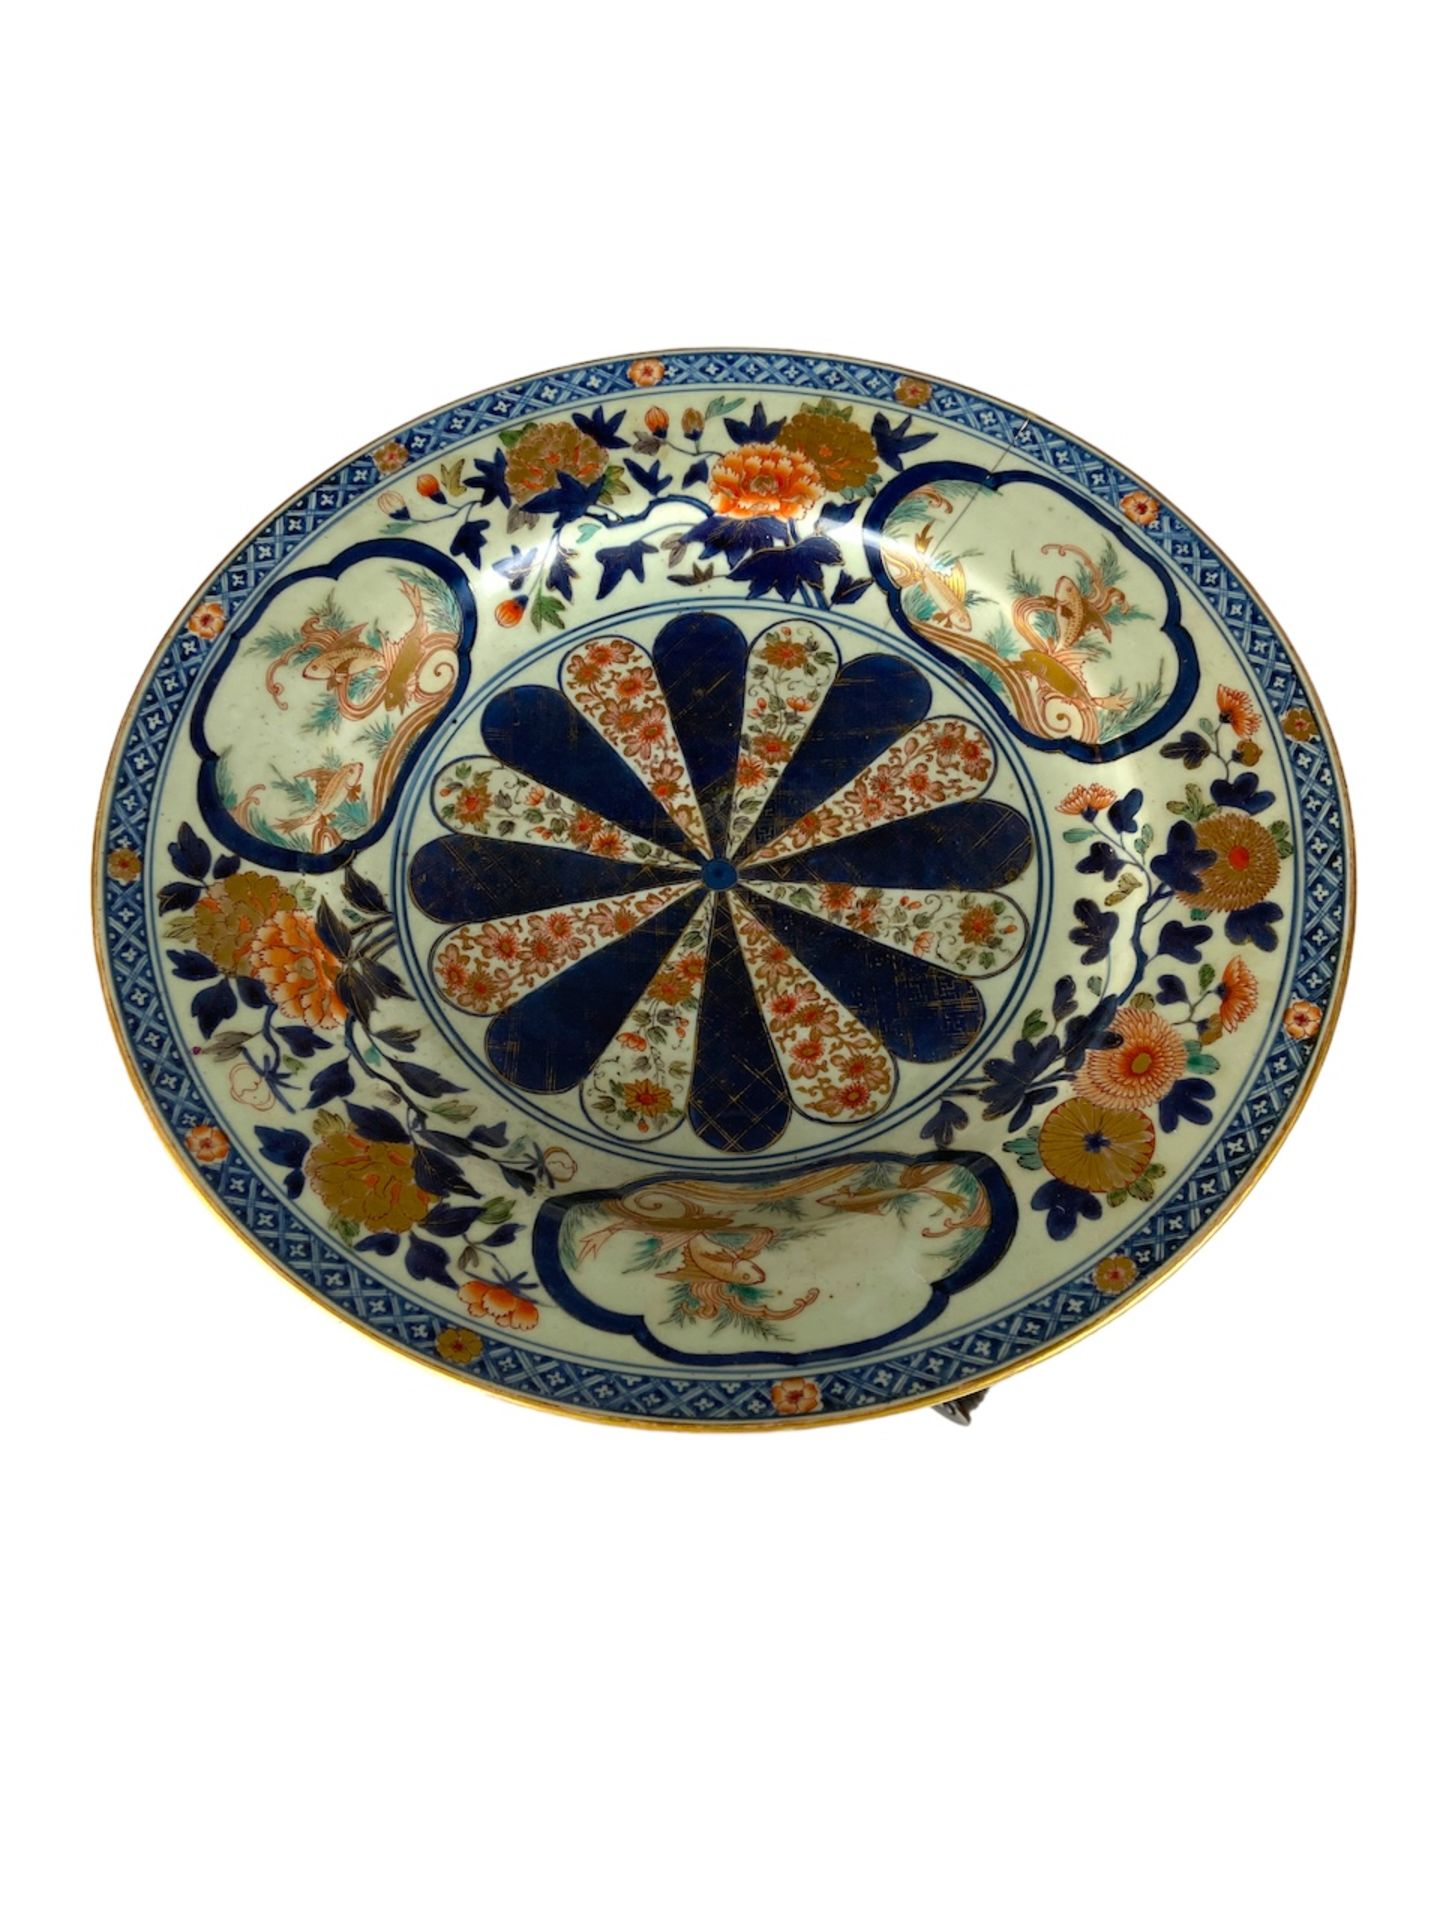 A Regency rosewood and gilt bronze mounted basin or jardiniere stand with and Edo period Imari dish - Image 7 of 8